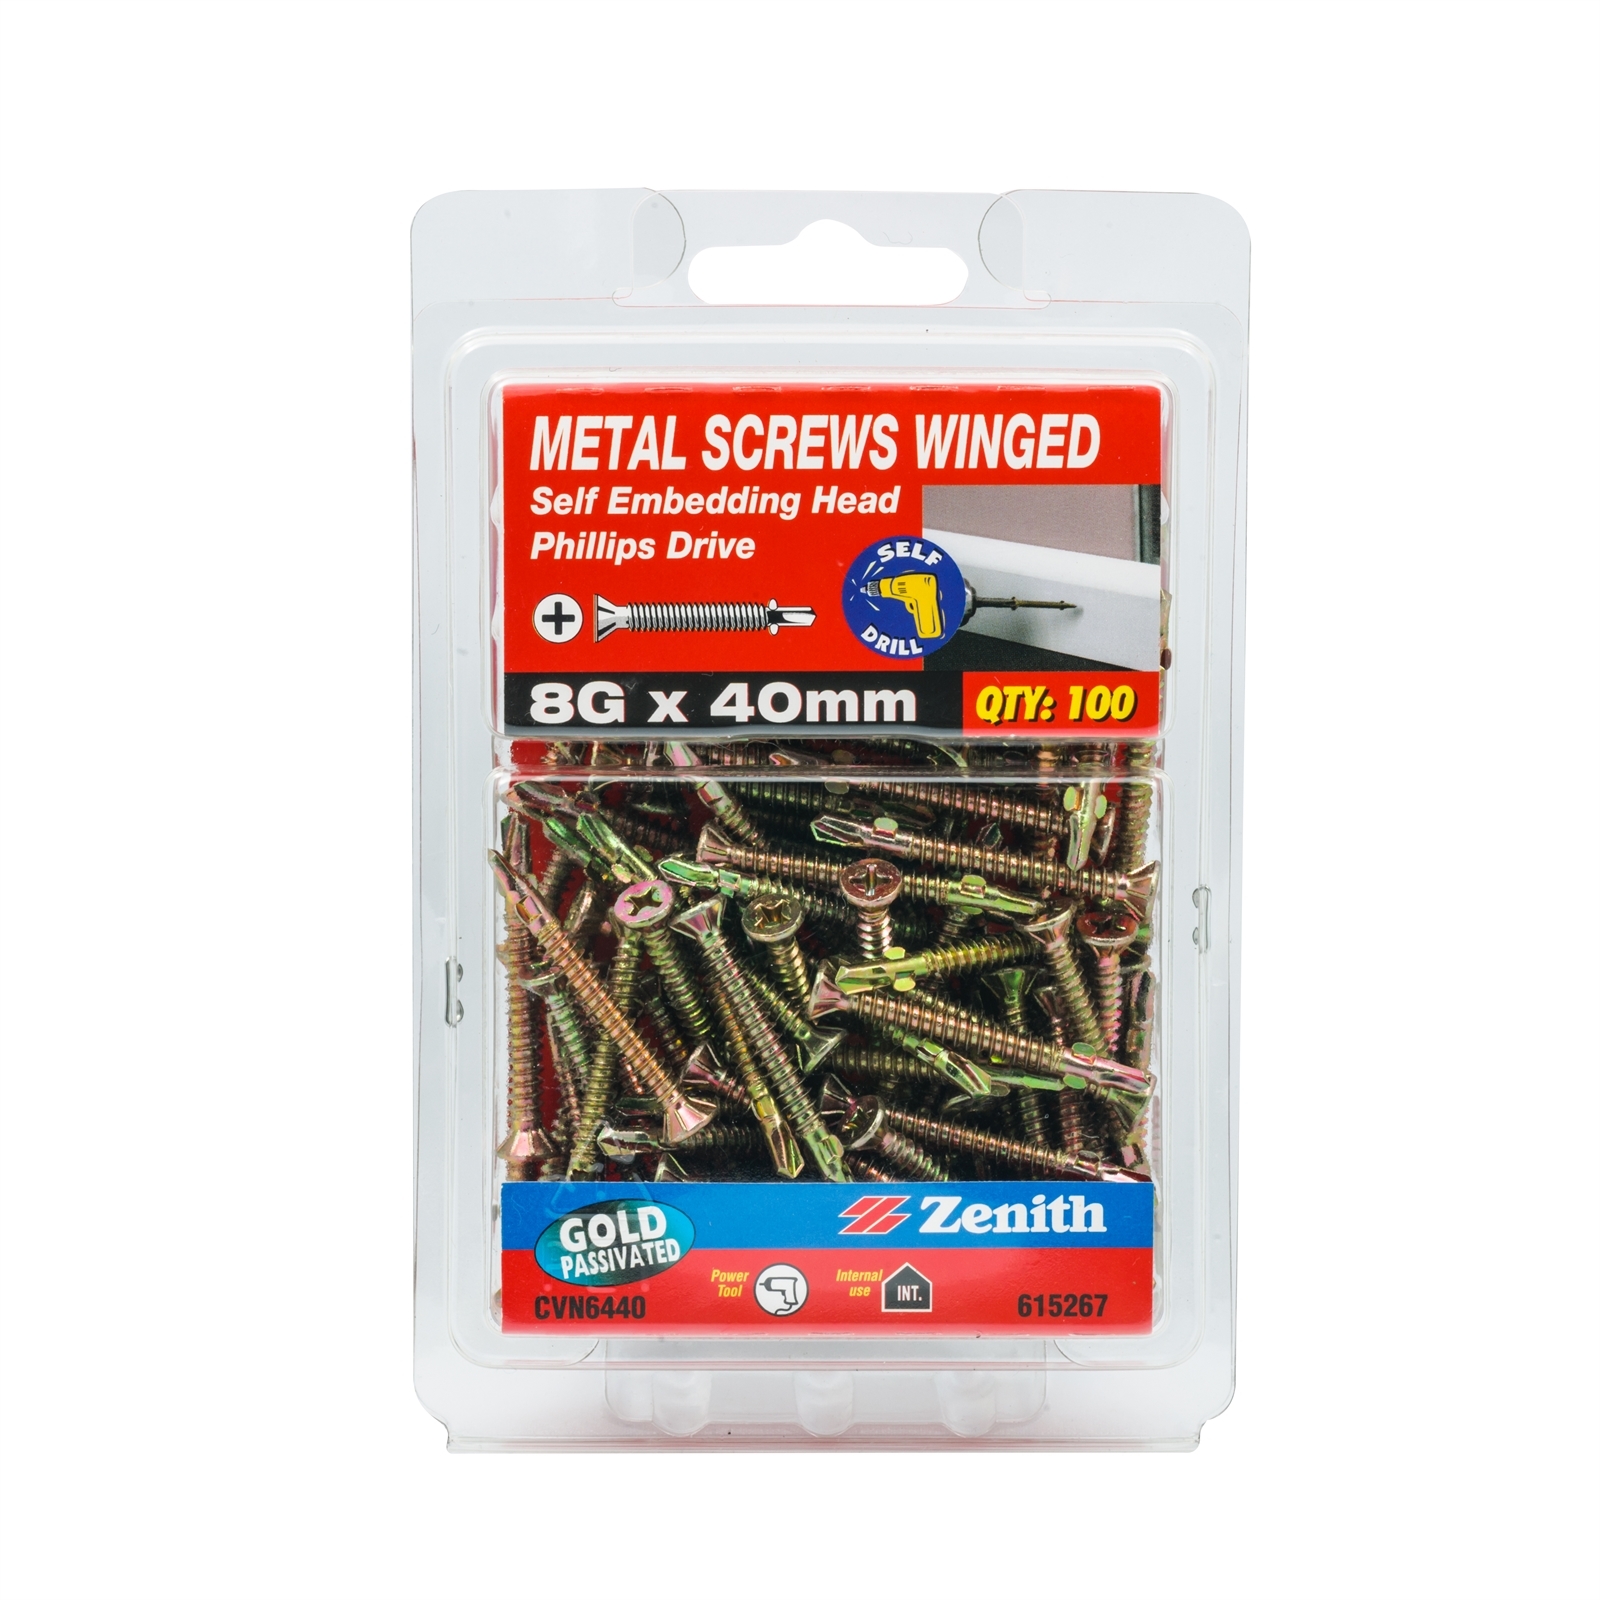 Zenith 8g X 40mm Gold Passivated Self Embedding Head Metal Screws Winged 100 Pack Bunnings